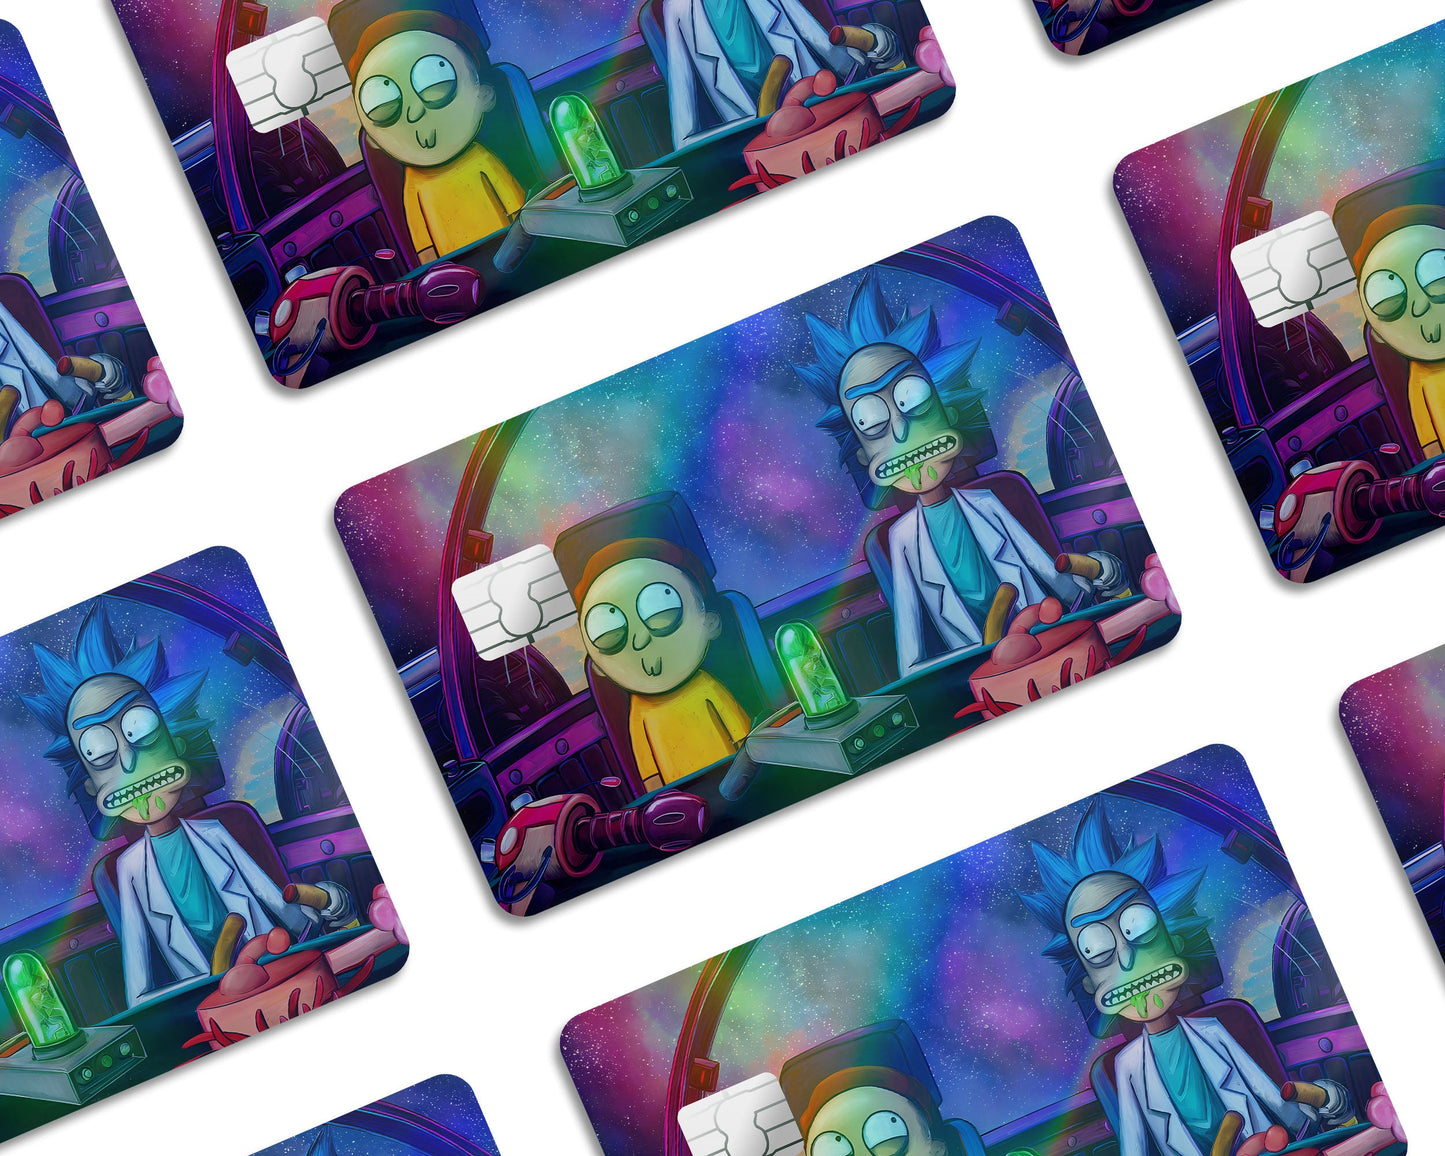 Anime Town Creations Holographic Credit Card Rick and Morty Spaceship Window Skins - Anime Rick and Morty Holographic Credit Card Skin